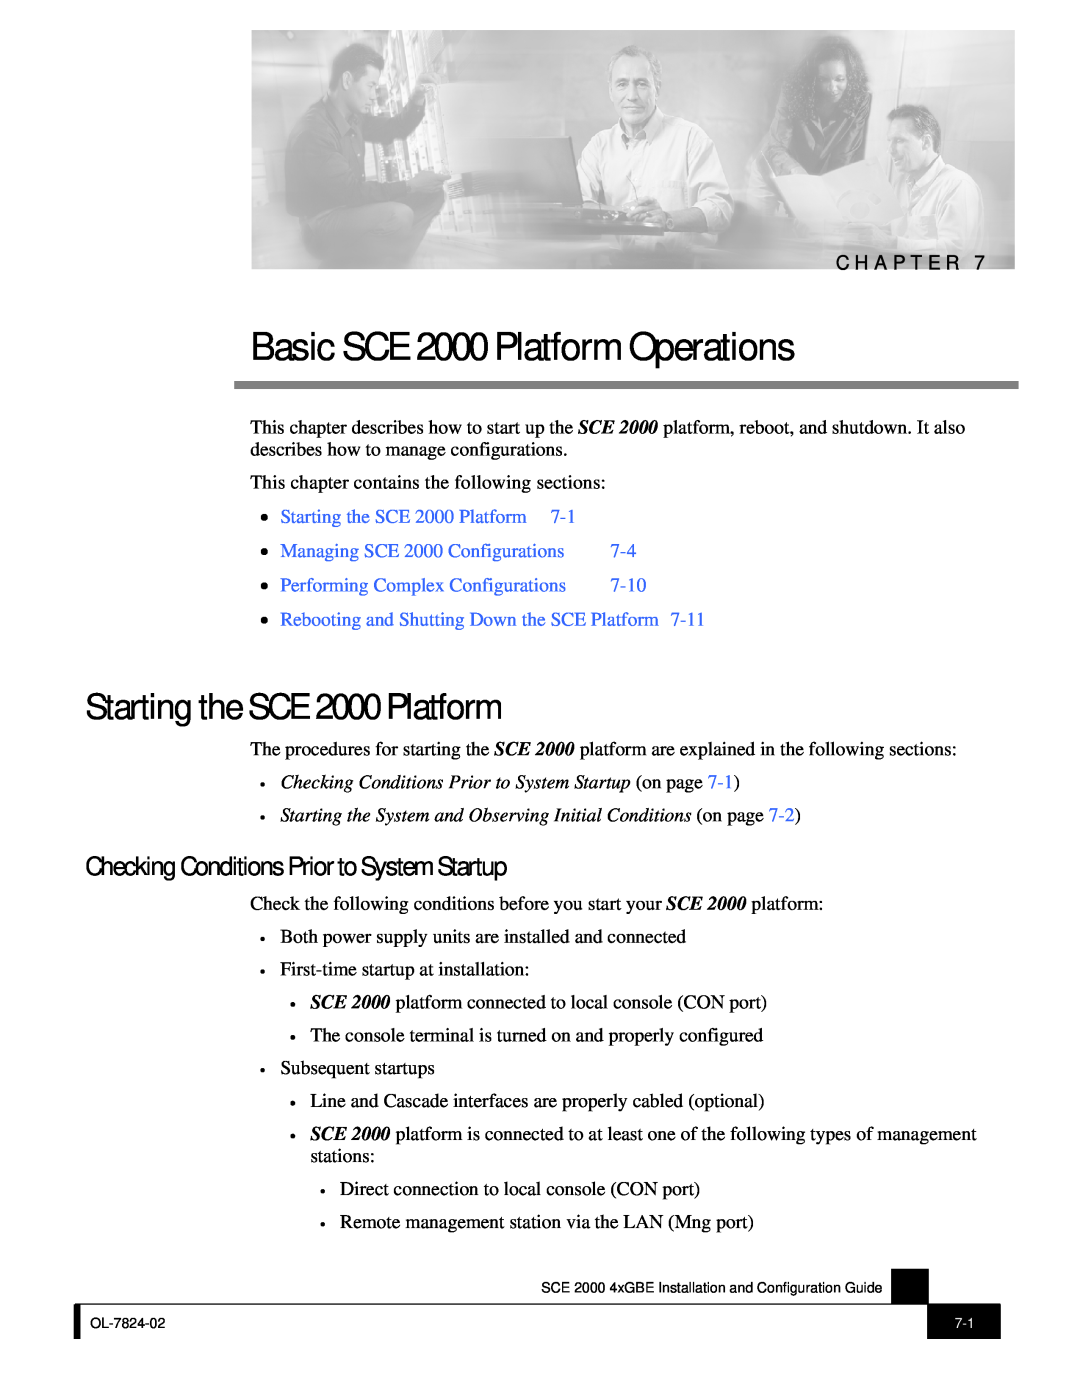 Cisco Systems SCE 2000 4xGBE manual Basic SCE 2000 Platform Operations, Starting the SCE 2000 Platform, 7-10, C H A P T E R 